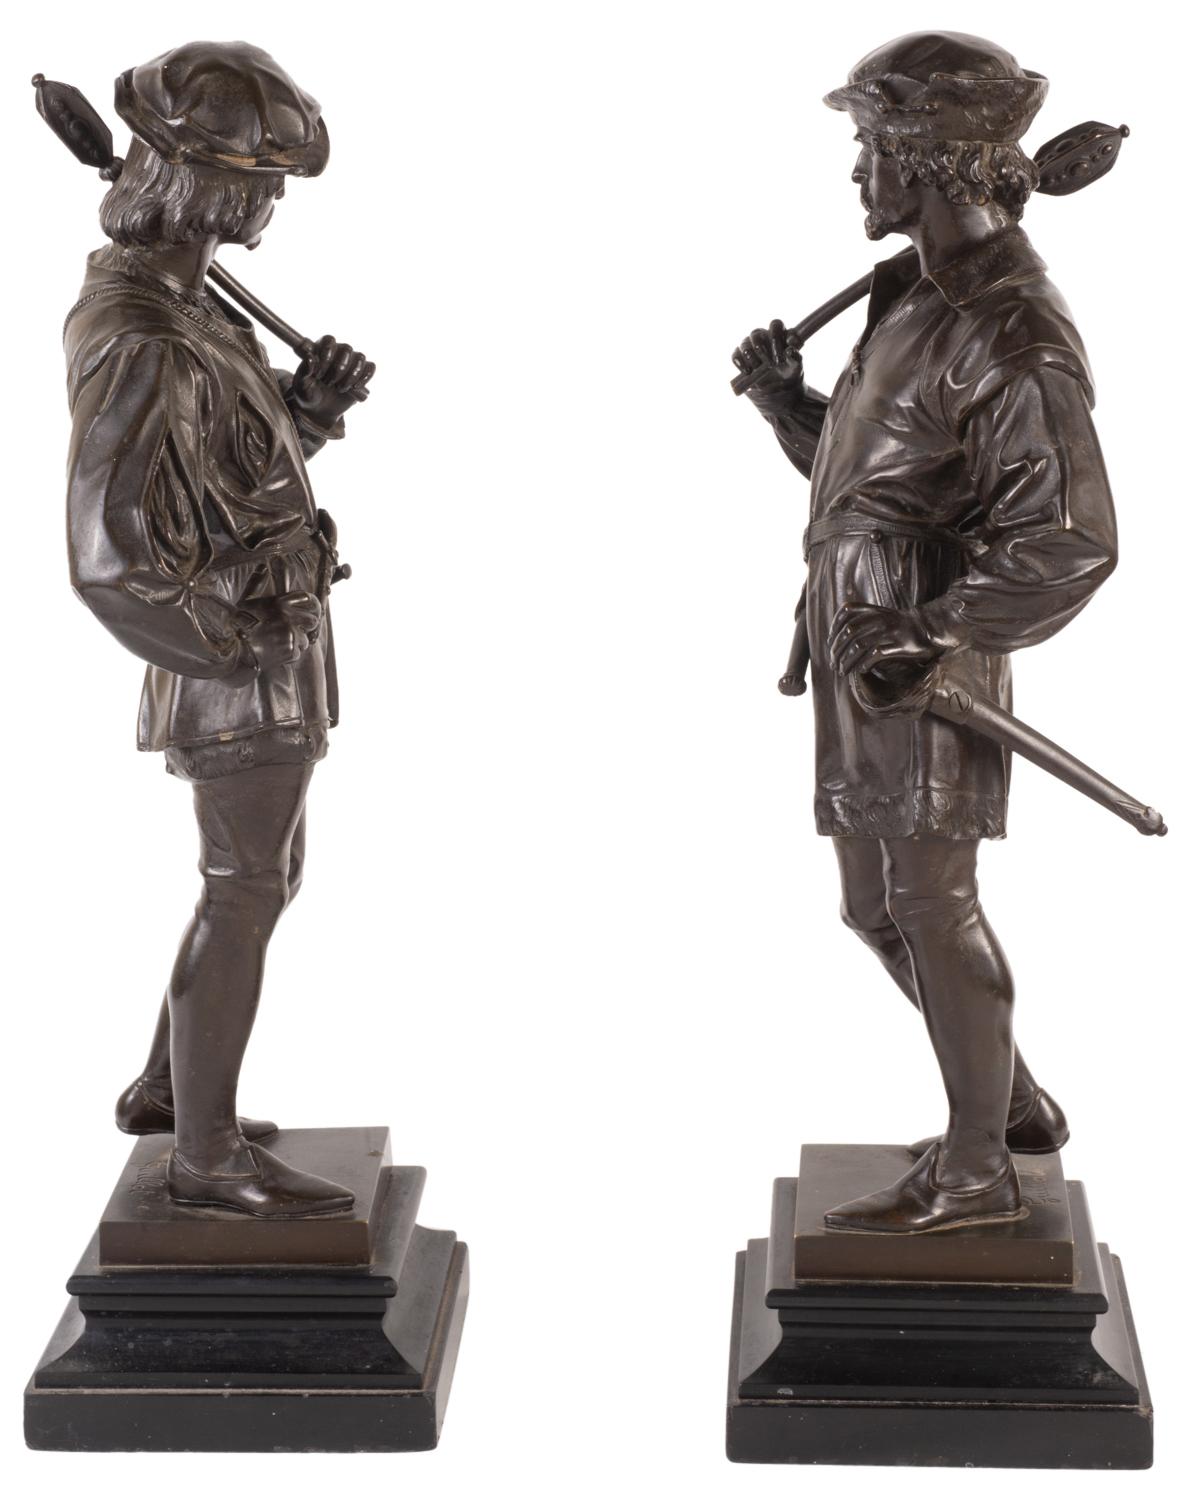 A pleasing pair of 19th century French bronze statues of Renaissance style huntsmen, signed. Guillot (French, 1865-1911).